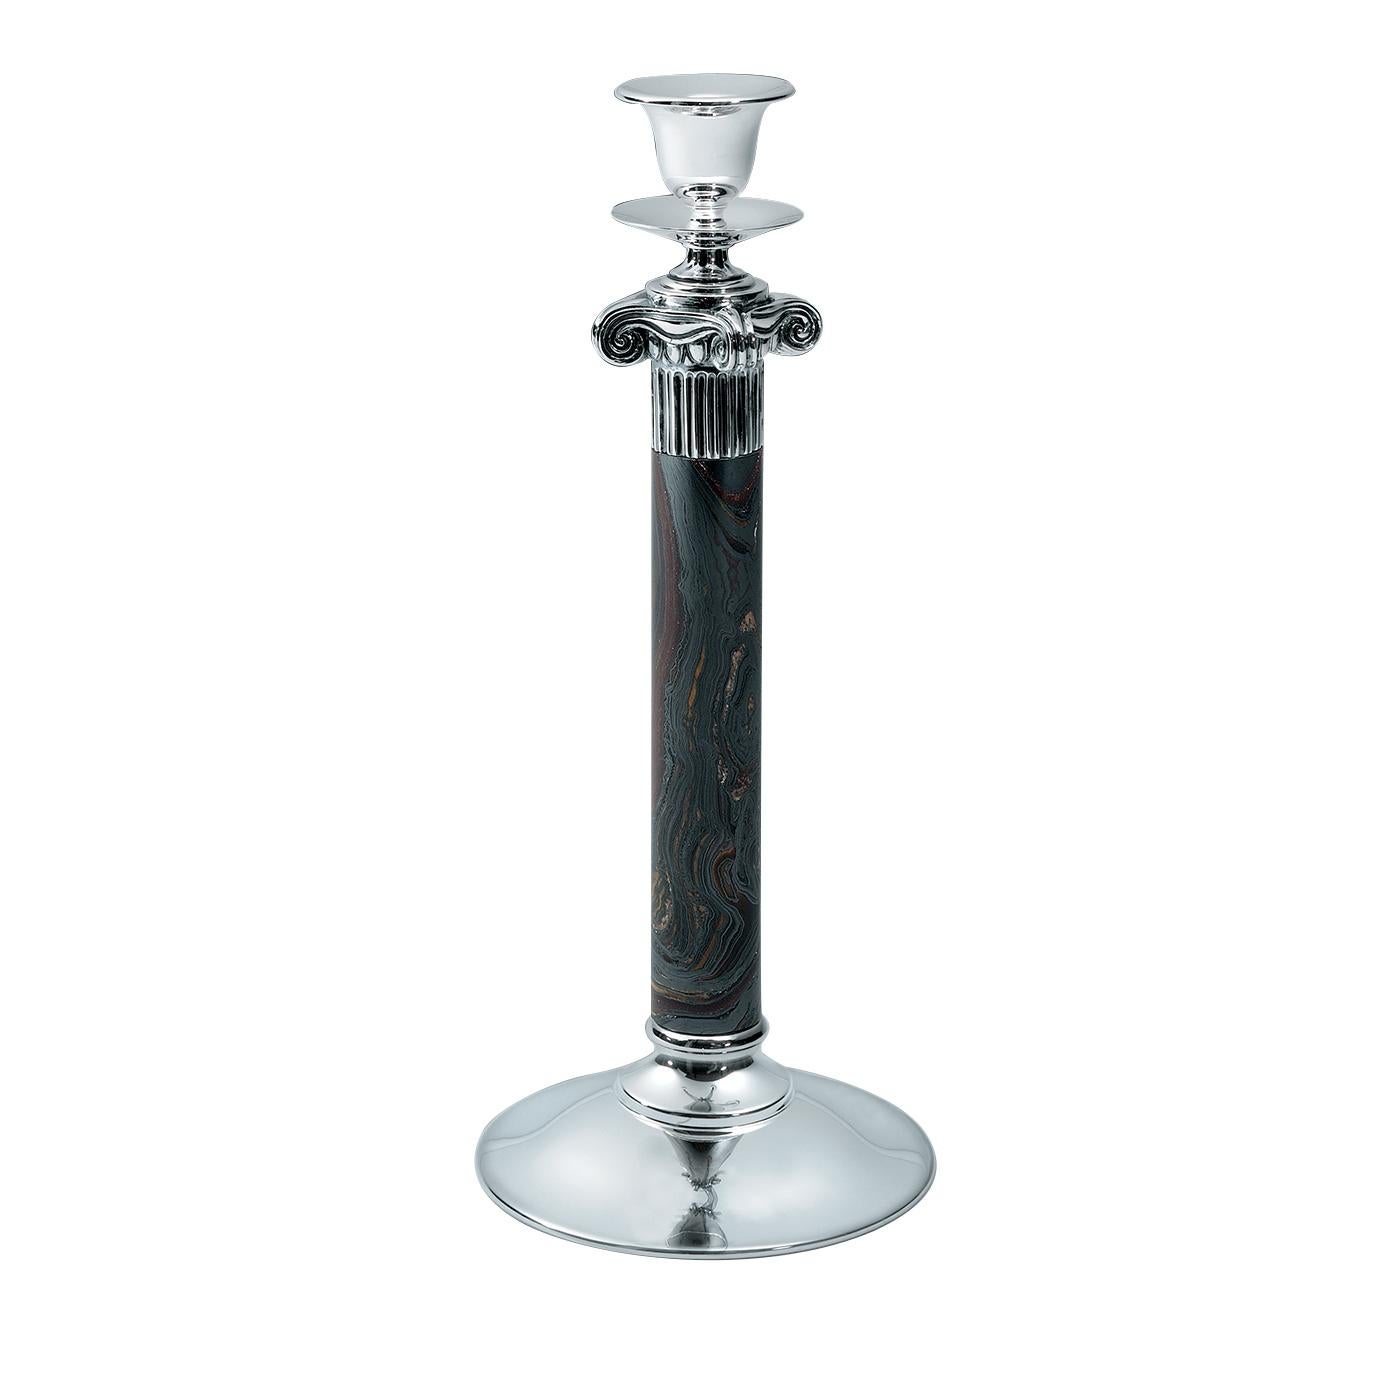 This sophisticated candleholder is composed of a polished silver round base and a stem made of tiger iron, while the Ionic-order capital that supports the silver bobeche and cup is crafted using the lost wax casting technique. Part of the Kallicrate